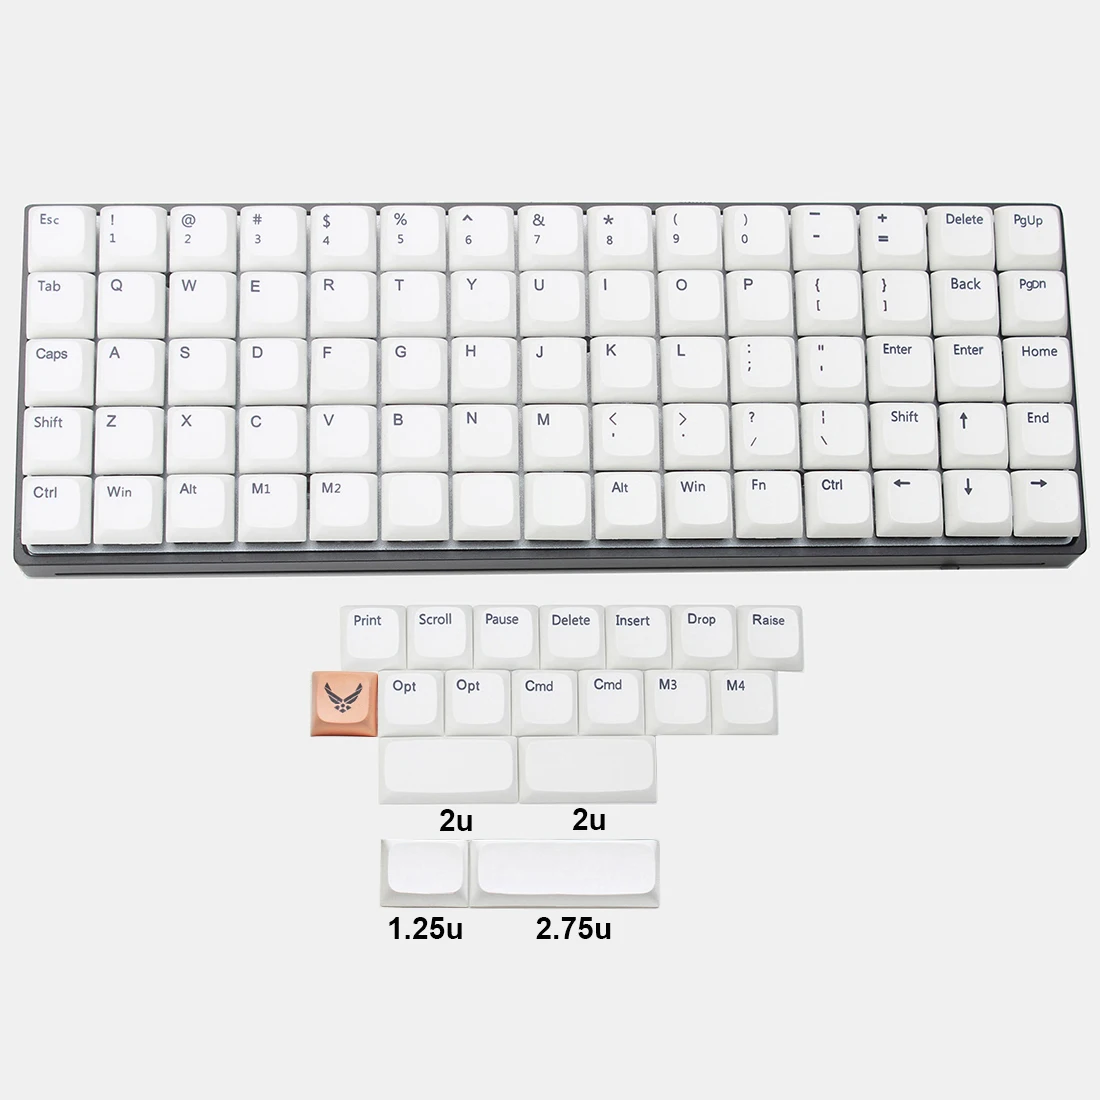 

XDAL Keycaps Compatible with Kailh Gateron Cherry MX Switches for Ortholinear Mechanical Keyboards AMJ40 NIU40 RGB75 XD75 KBD75